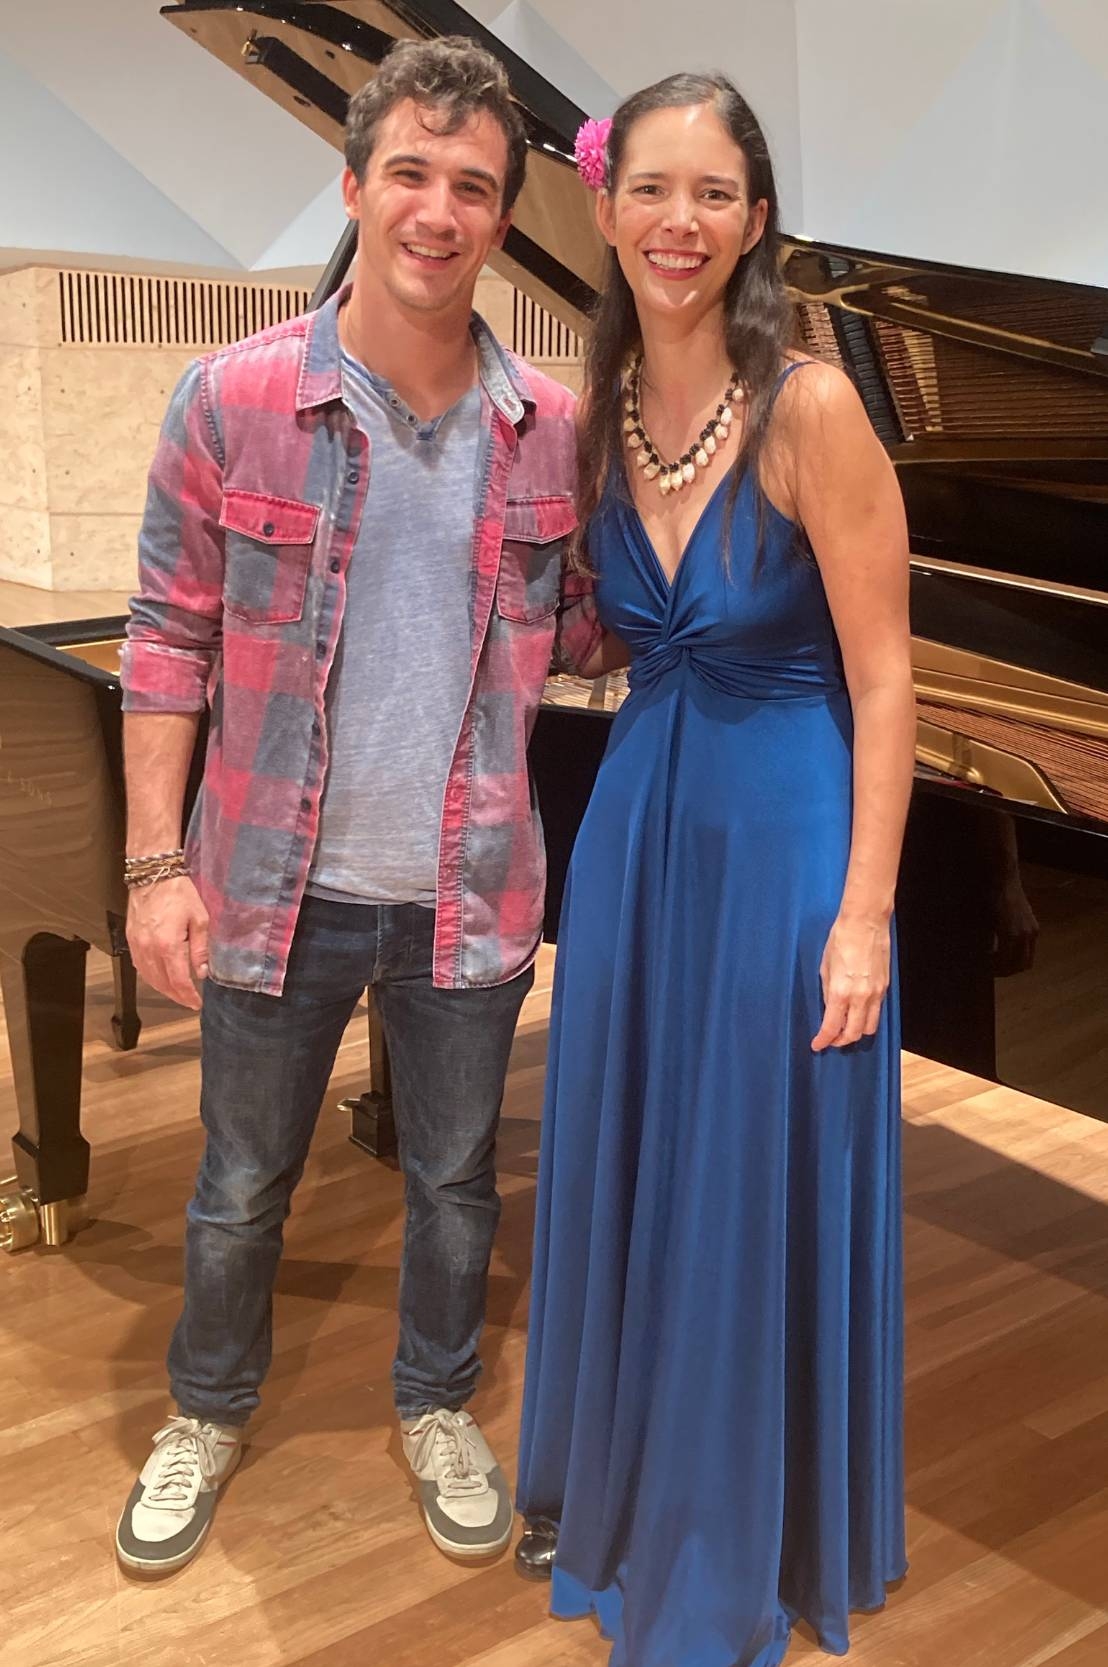 A white man with grey jeans, a grey henley shirt and a red and grey plaid button-down, stands in front of a grand piano beside a woman with long brown hair, a red flower in her hair, and a blue full-length satin gown. They are both smiling.